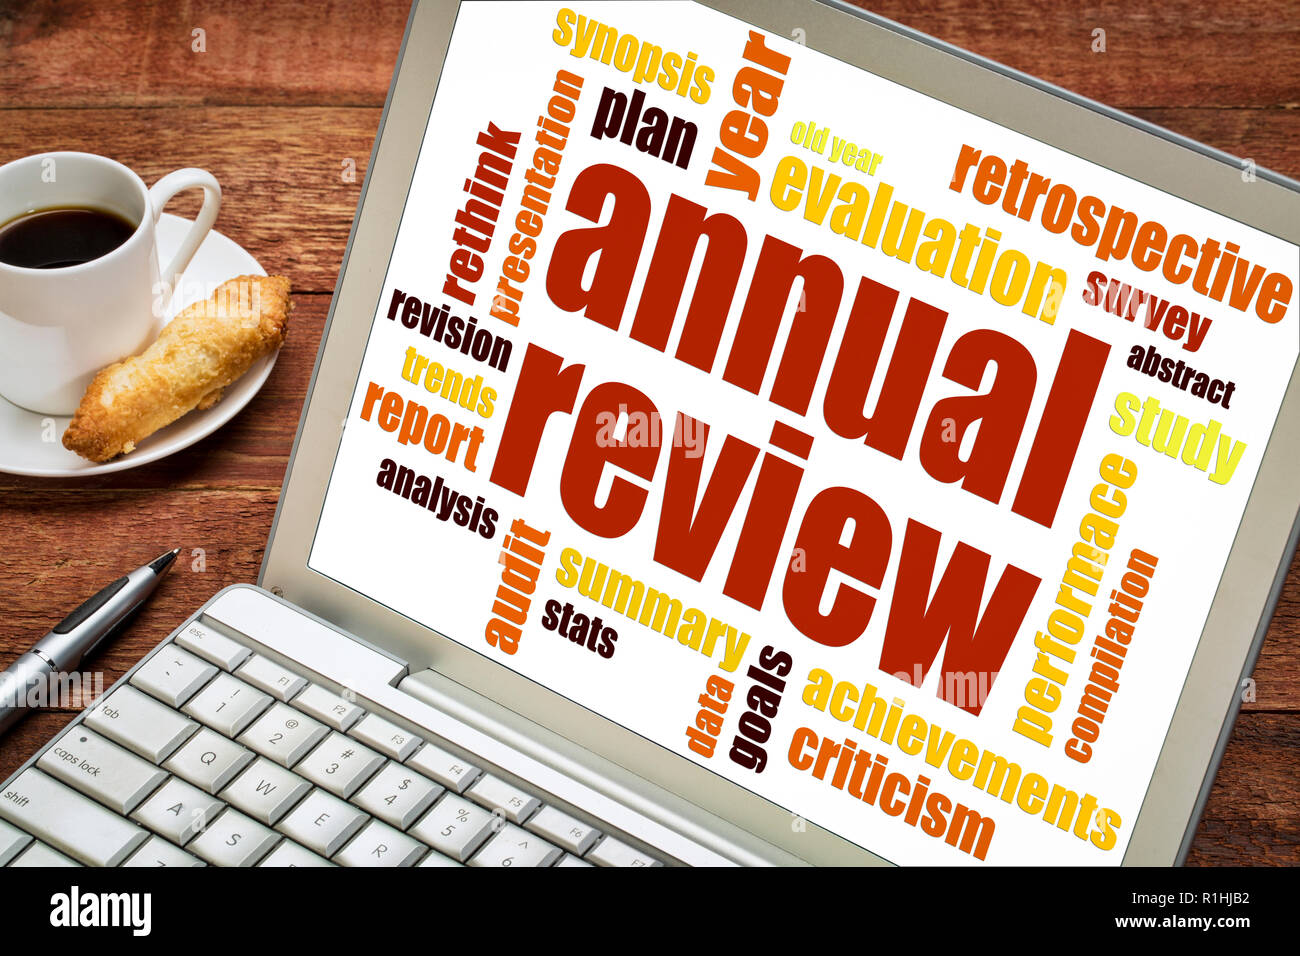 annual review word cloud on a laptop screen with a cup of coffee Stock Photo